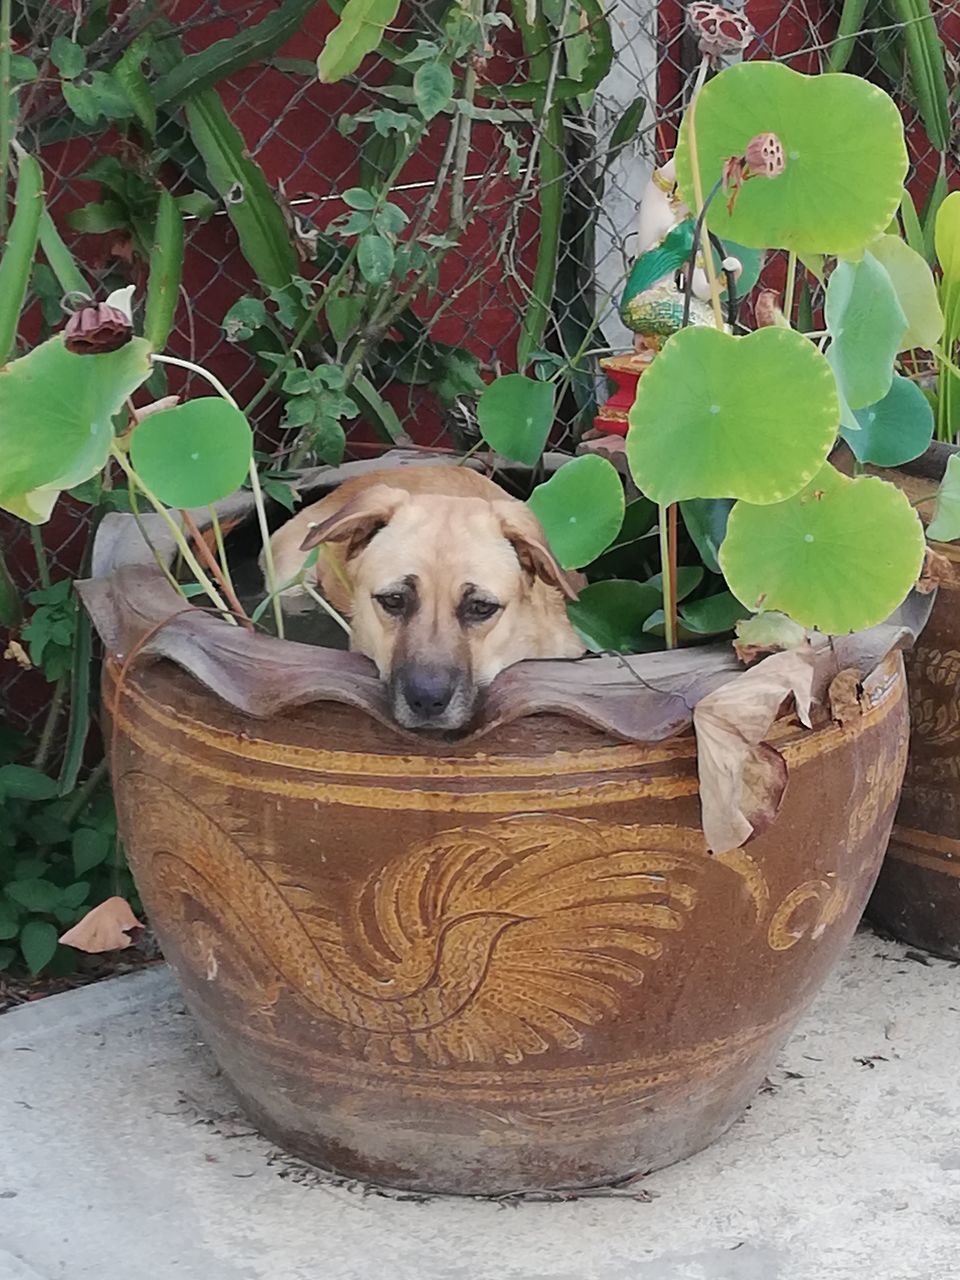 PORTRAIT OF A DOG IN A POT